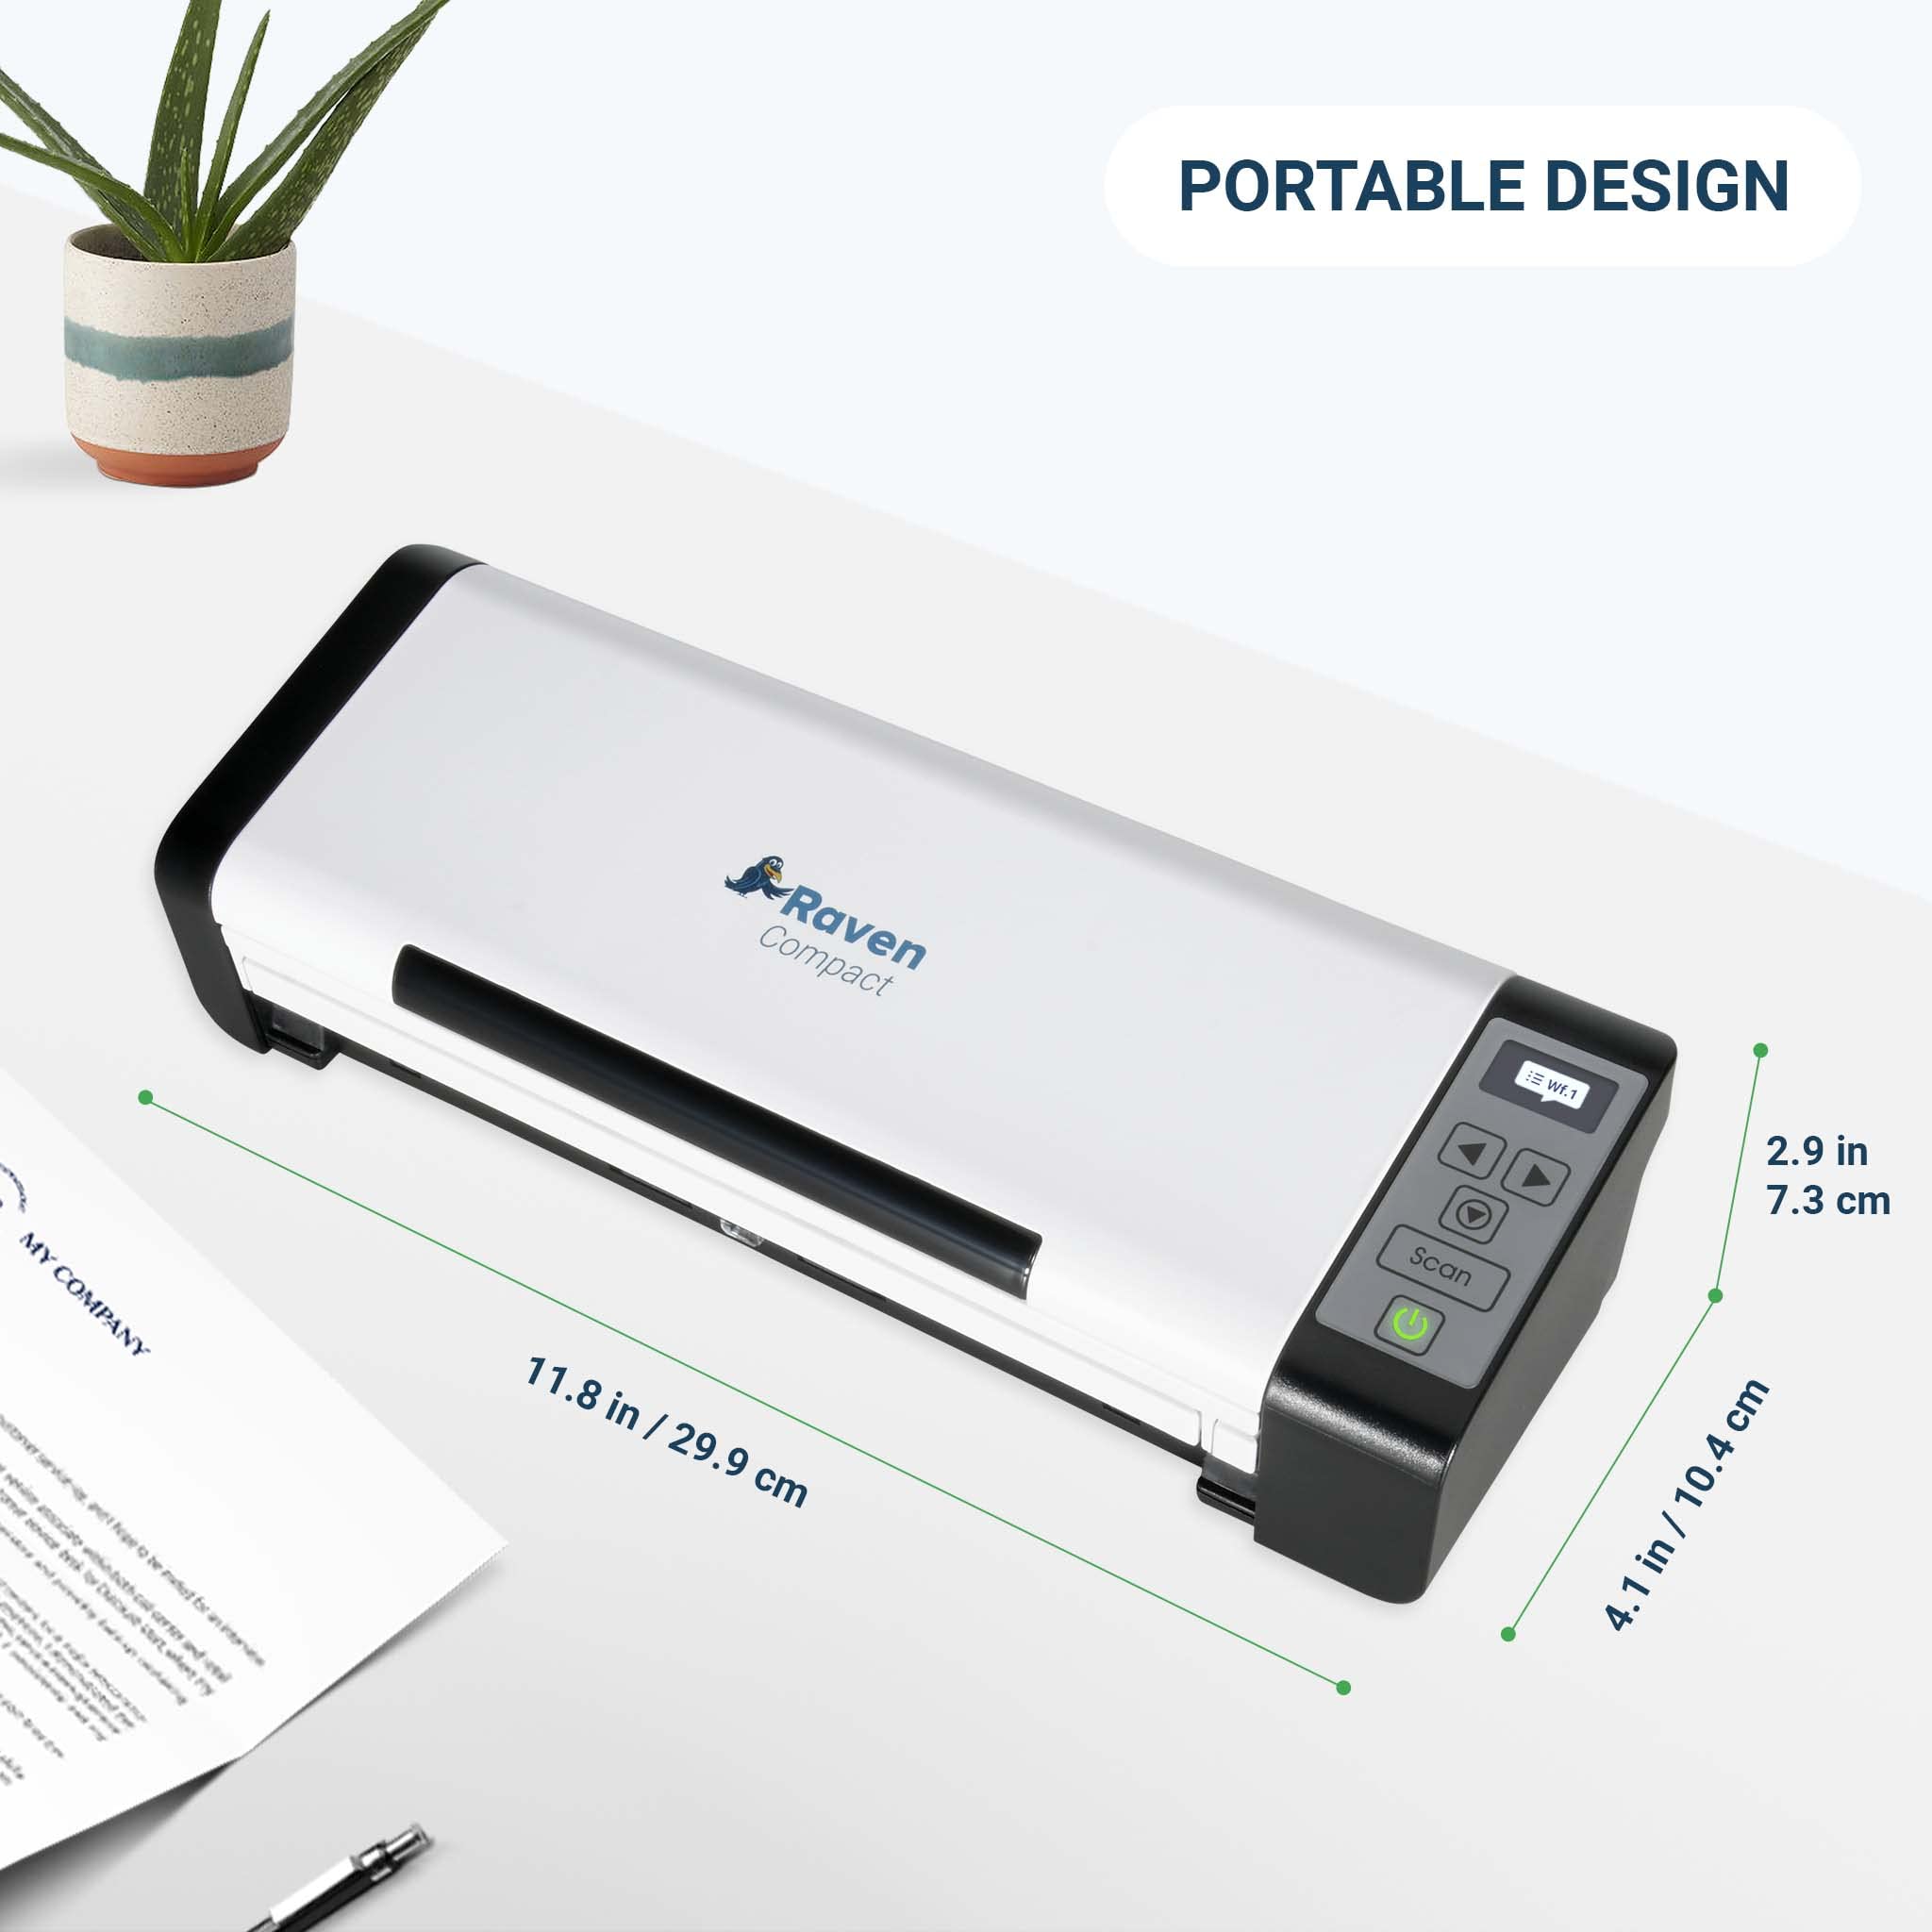 Raven Compact Document Scanner - Fast Duplex Scanning, Ideal for Home or Office, Scan to Mac or Windows PC by USB, Includes Raven Desktop Software